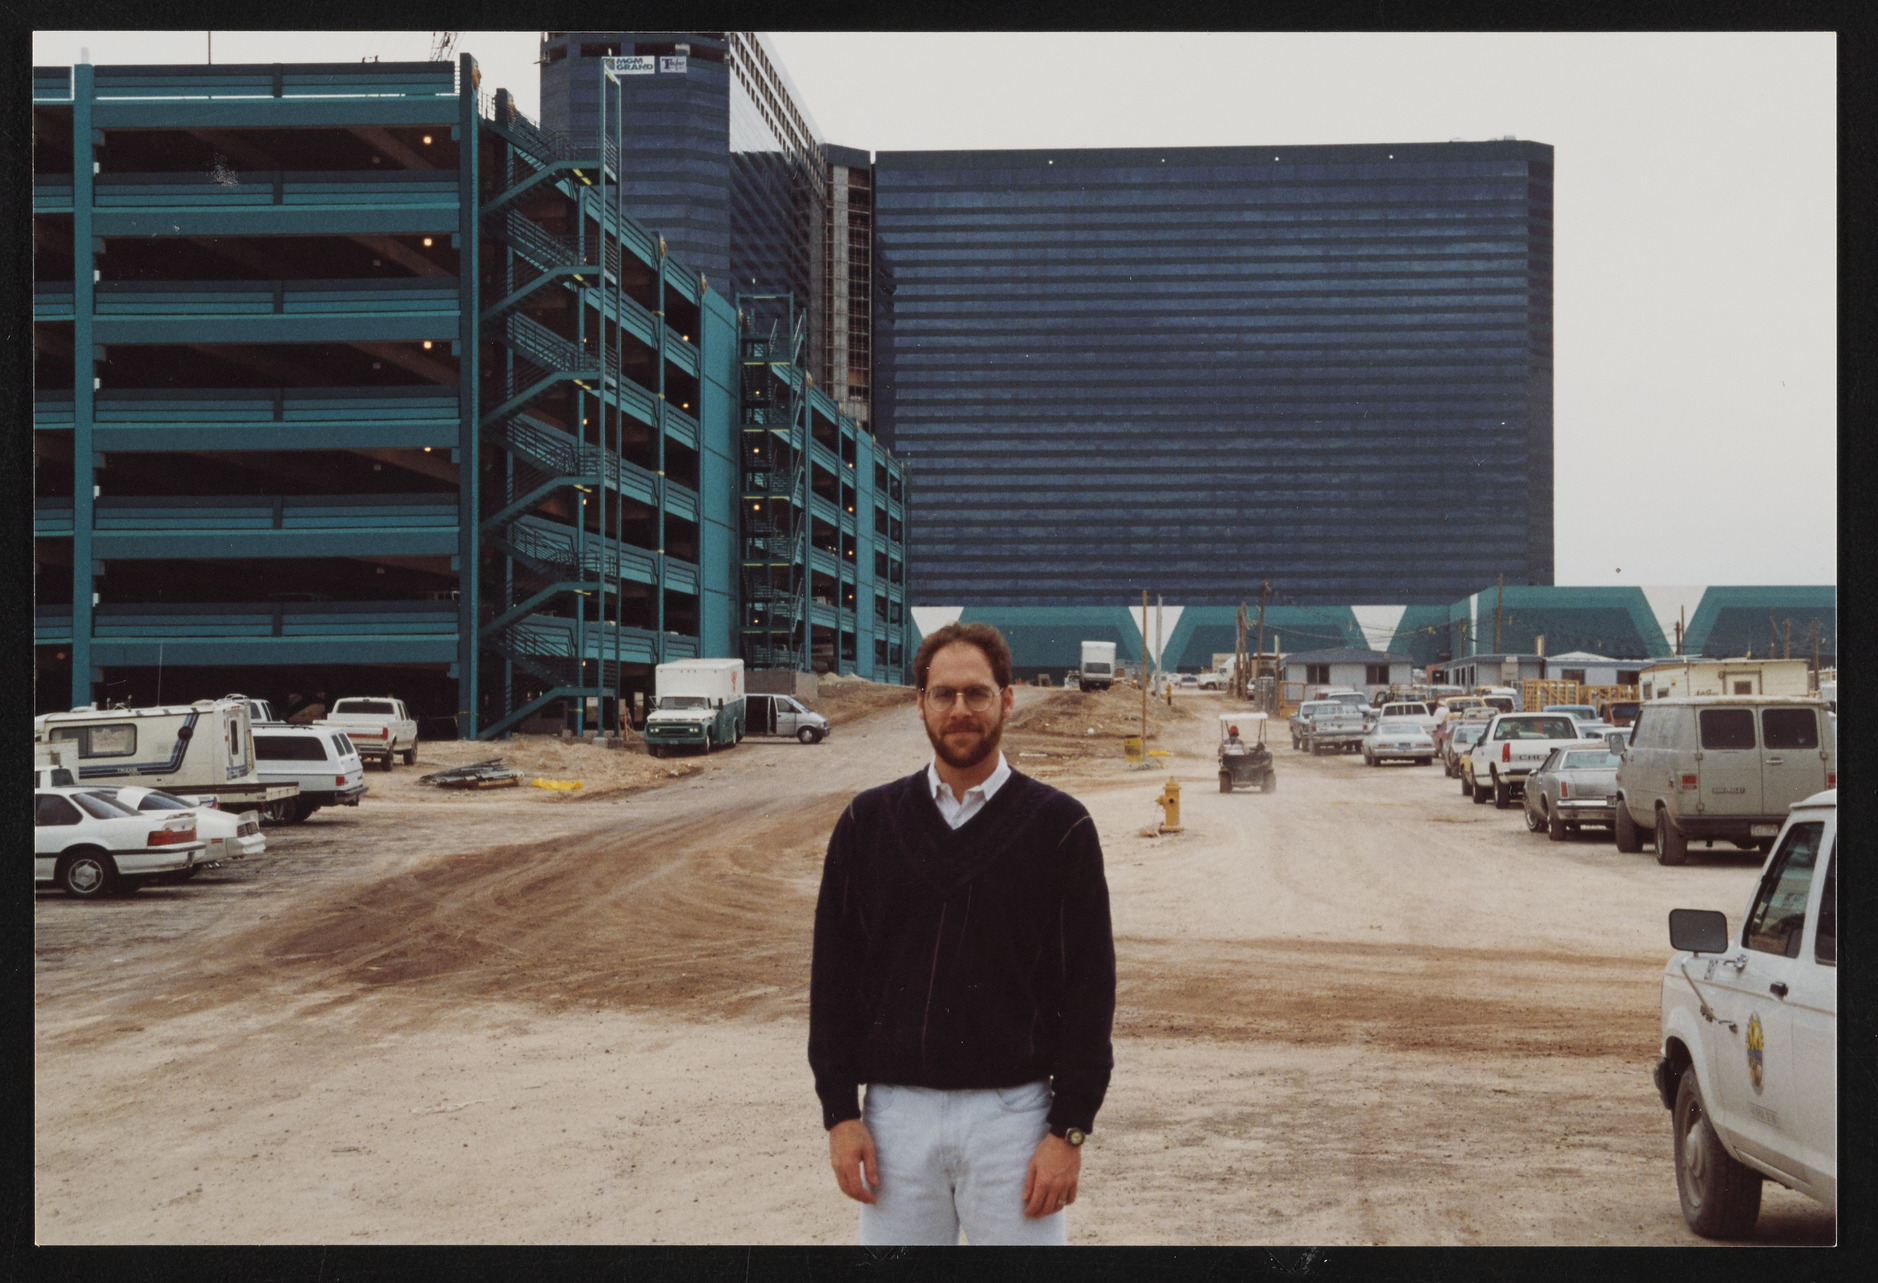 MGM construction party, image 17